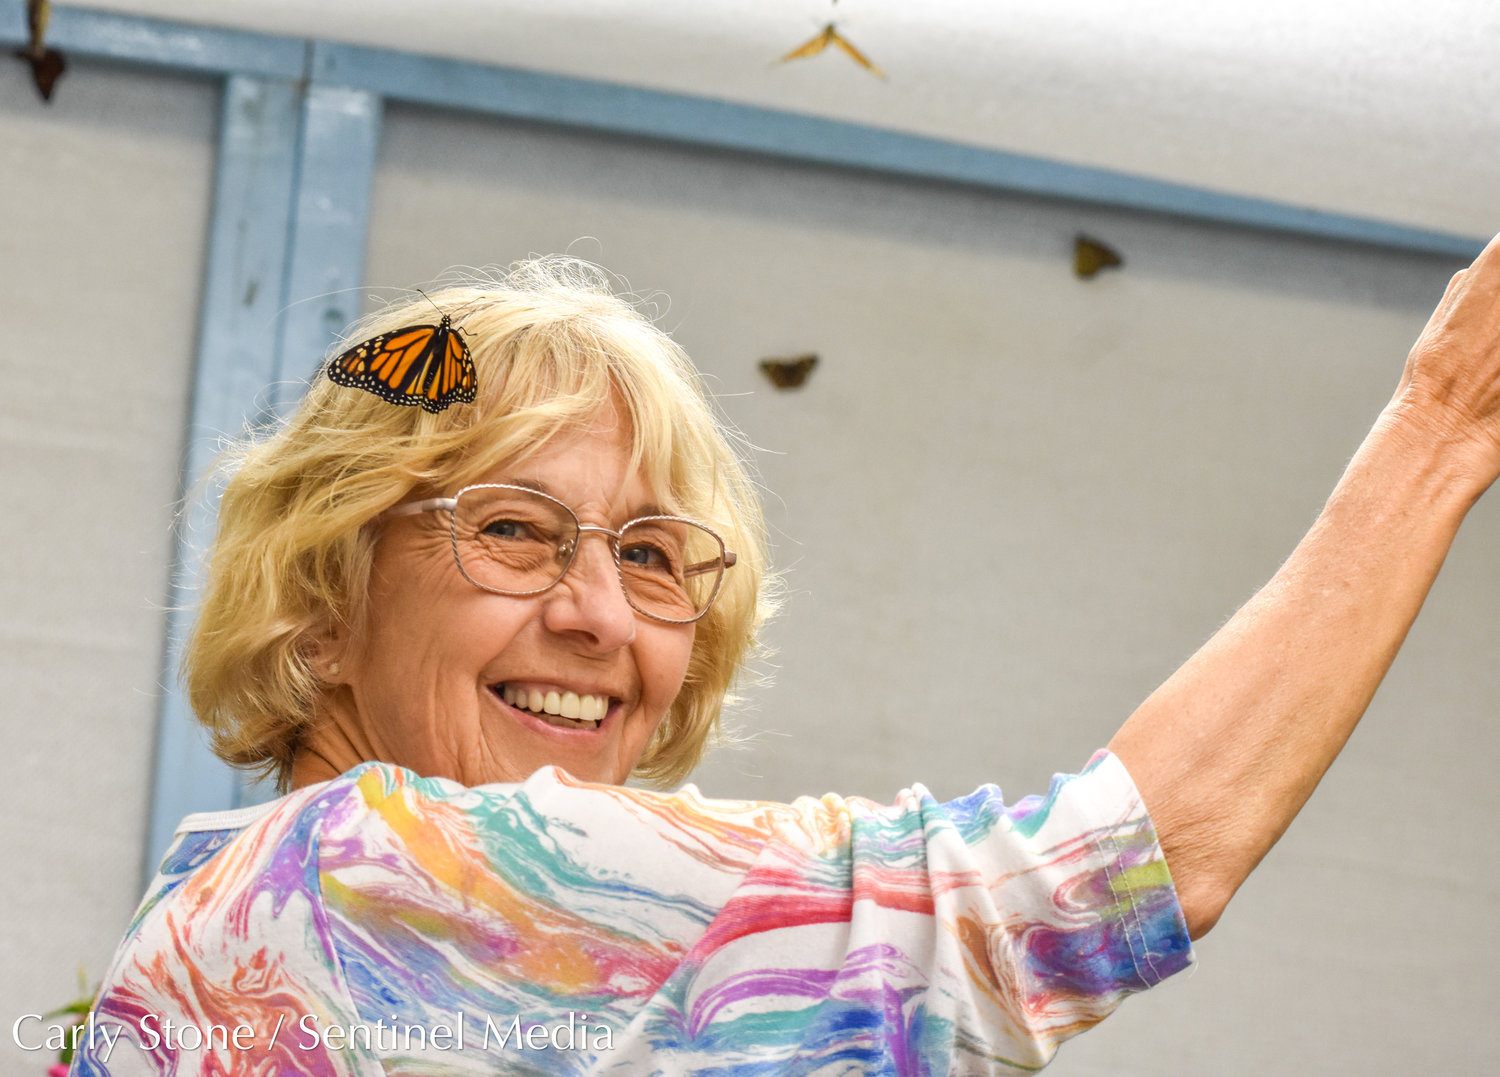 Rae Zollo, a Syracuse native visiting from out of state, wears a butterfly as if it were a hair accessory. This butterfly and many others interacted with guests inside the butterfly exhibit in the Horticulture Building at the 2022 New York State Fair.